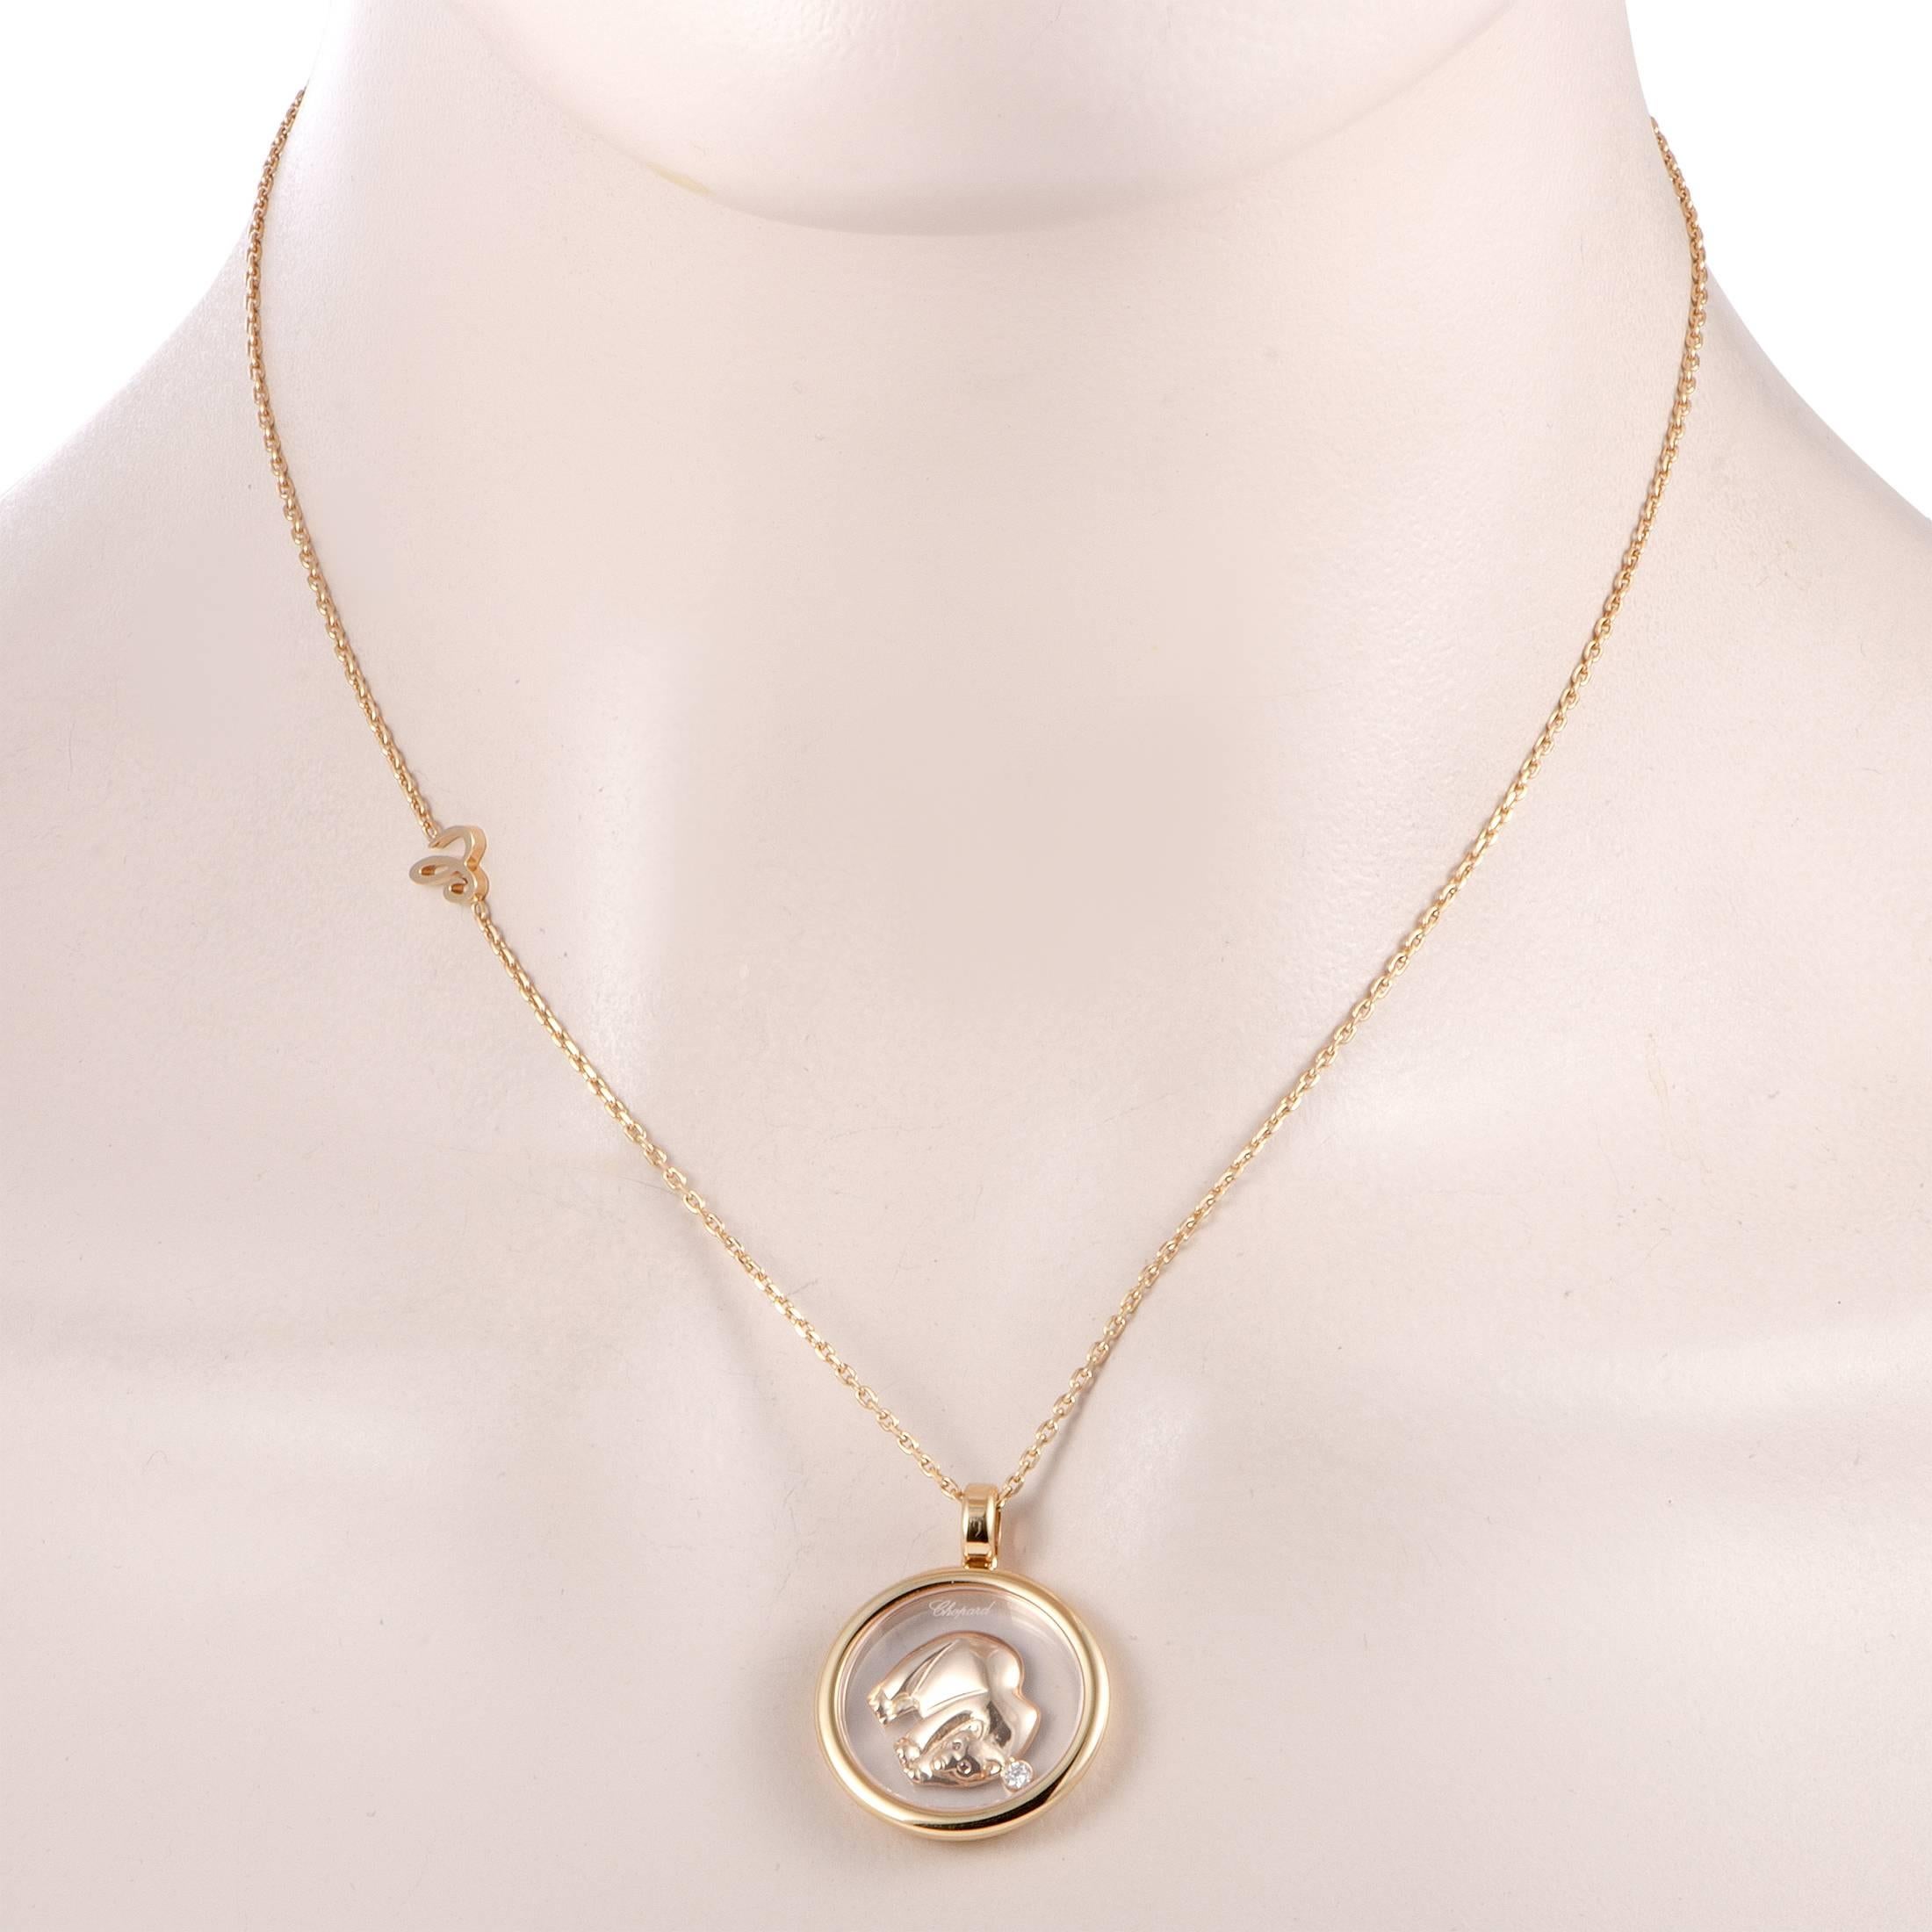 The very best of irresistible timeless elegance and endearingly offbeat design is embodied in this spectacular necklace that is presented by the renowned Swiss jewelry maker, Chopard. The necklace is exquisitely crafted from 18K rose gold and weighs